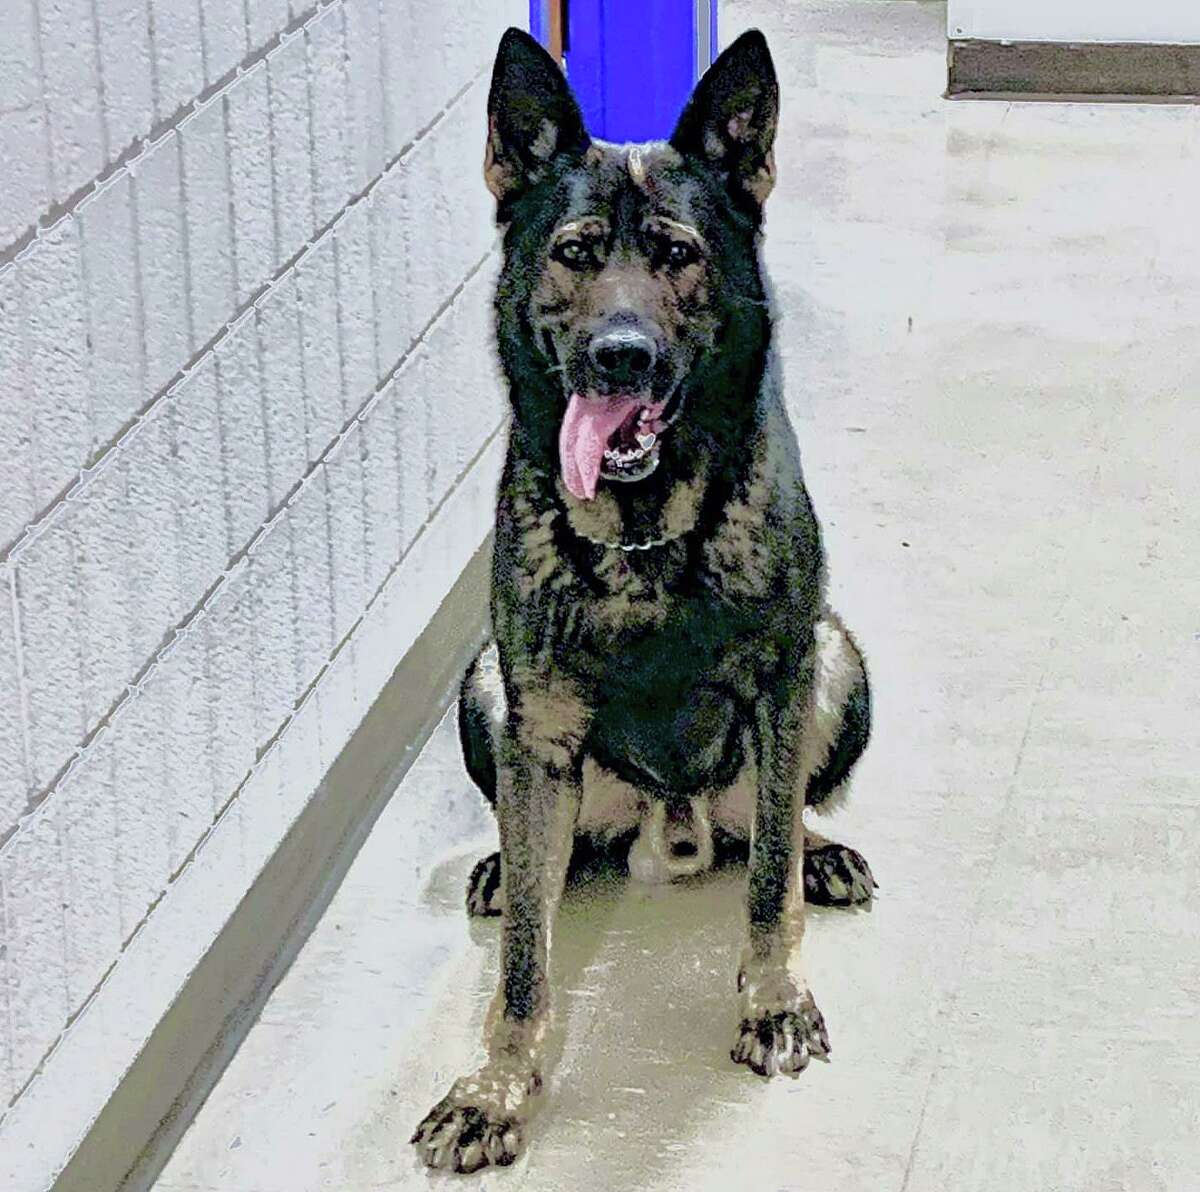 K-9 Jack, from state police Troop E barracks in Montville, Conn., apprehended a Bridgeport man after a disturbance near the Mohegan Sun Casino on June 12, 2021, according to police.